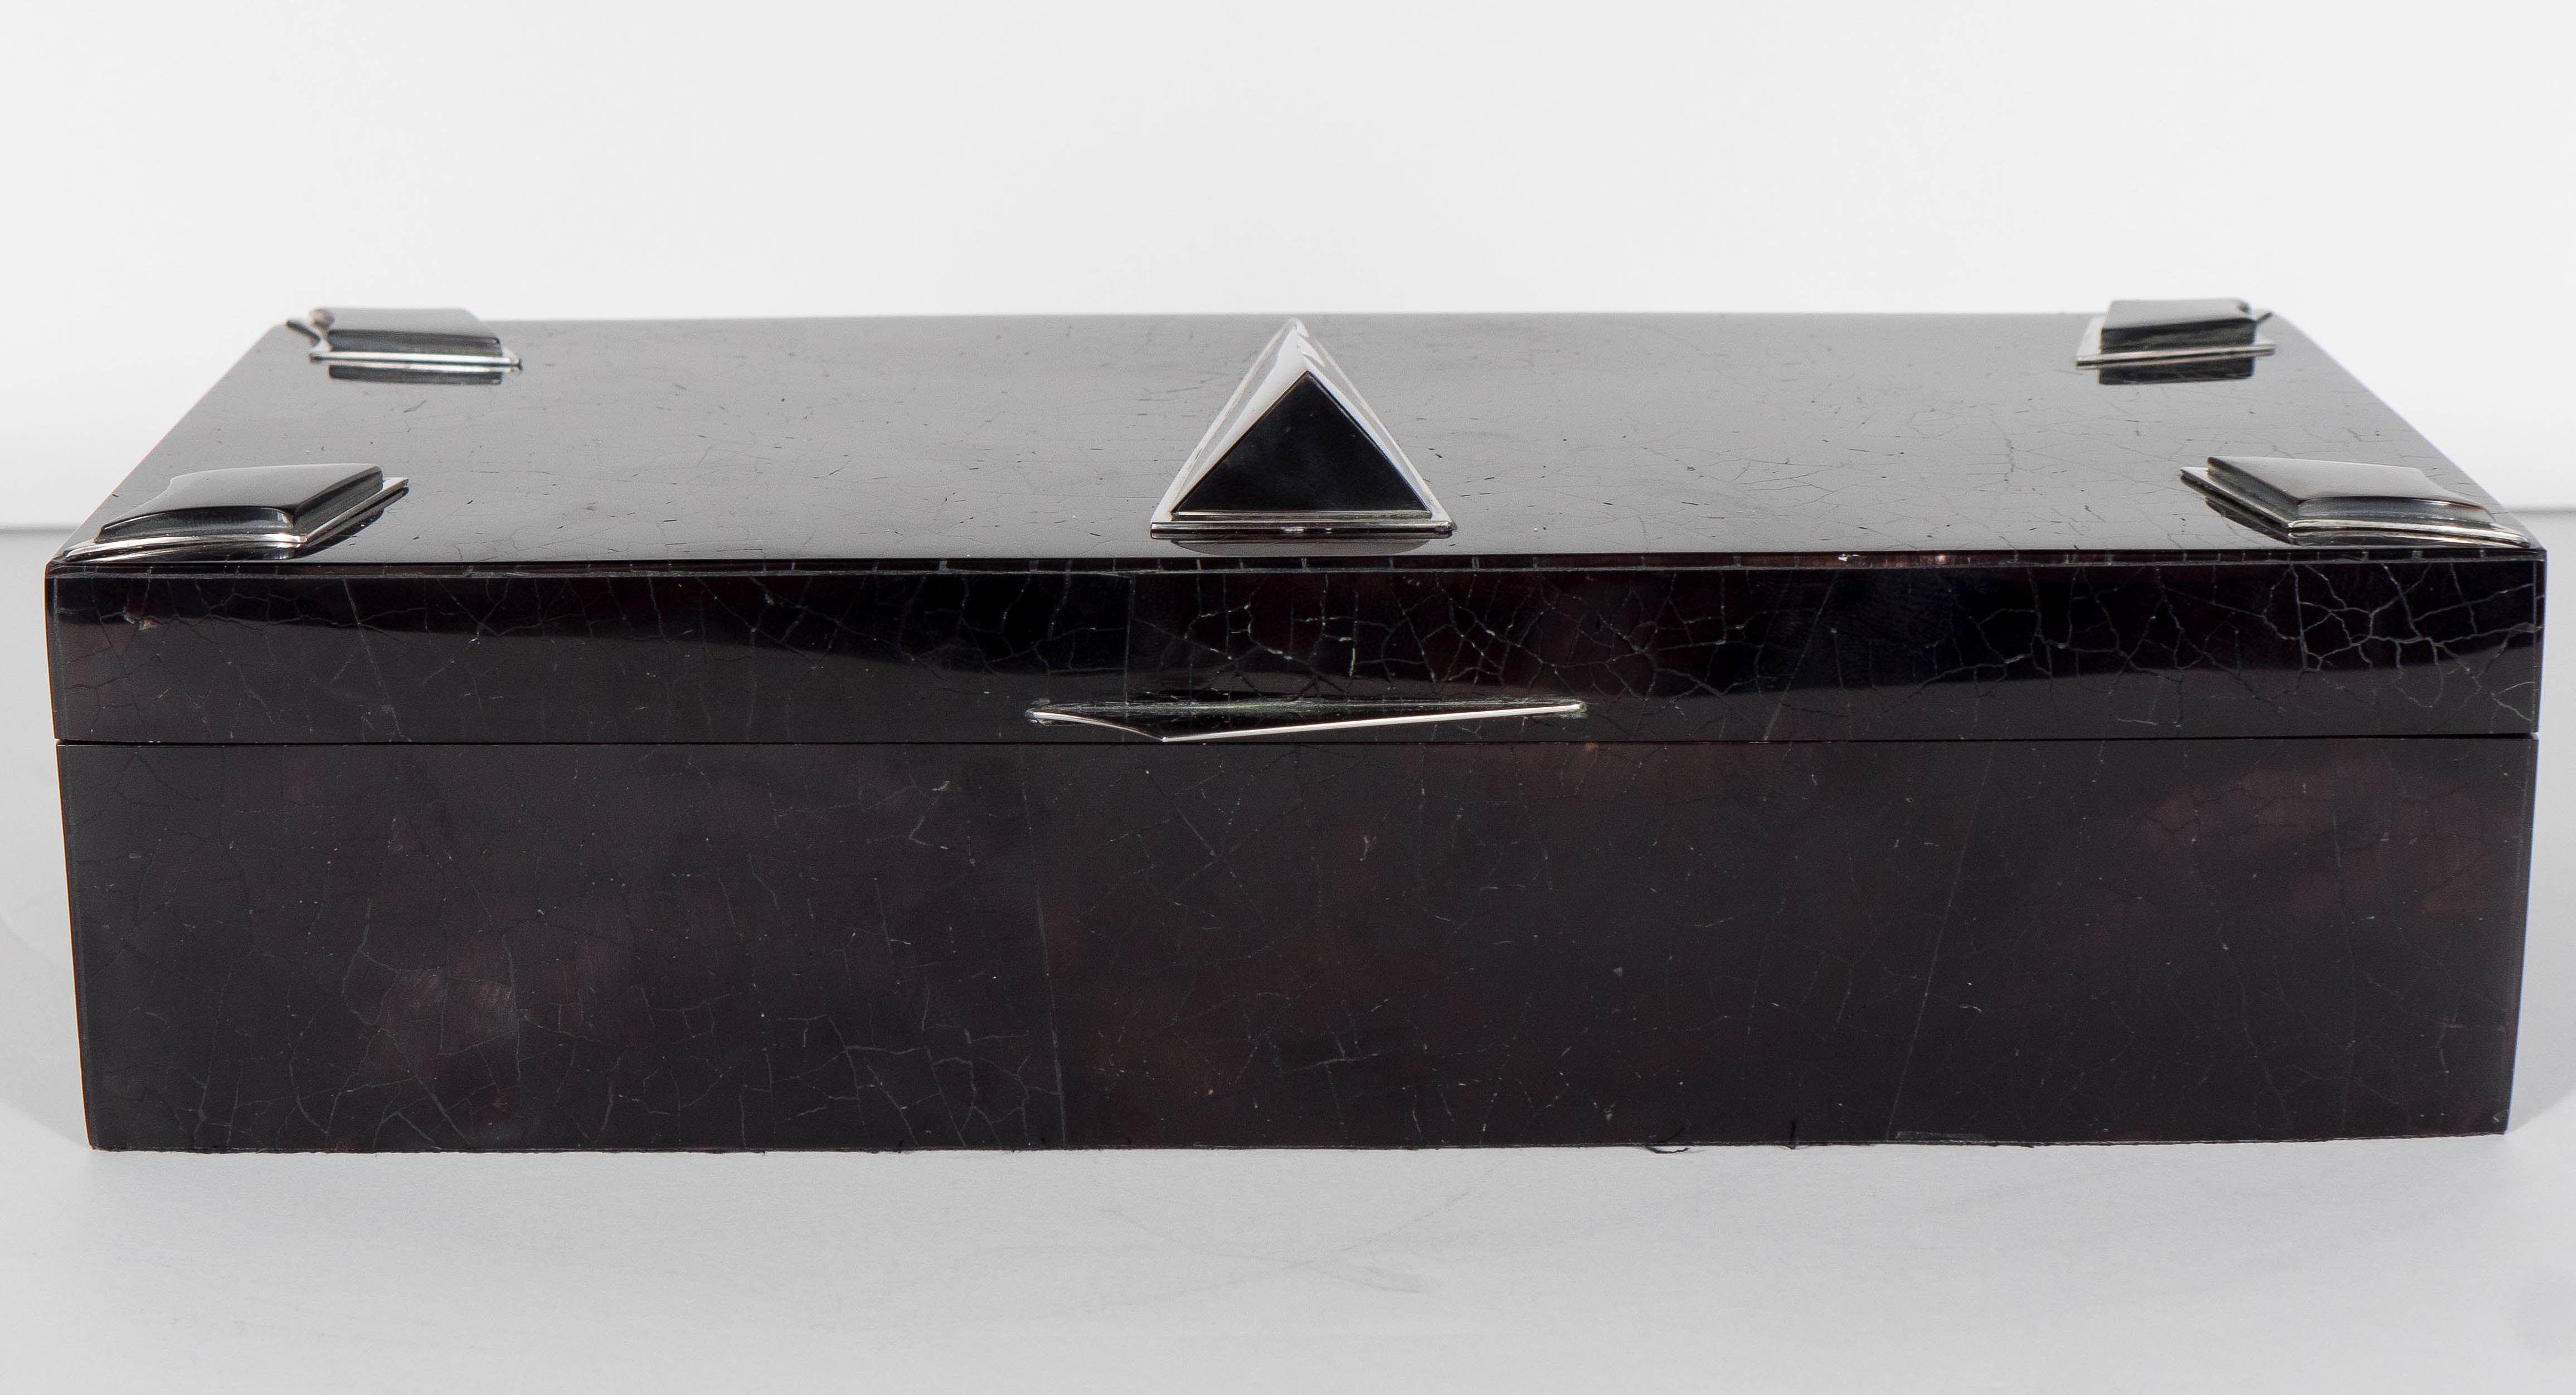 Exquisite Black Lacquer box w/ Cracqueleur varnish and mother-of-pearl Detailing